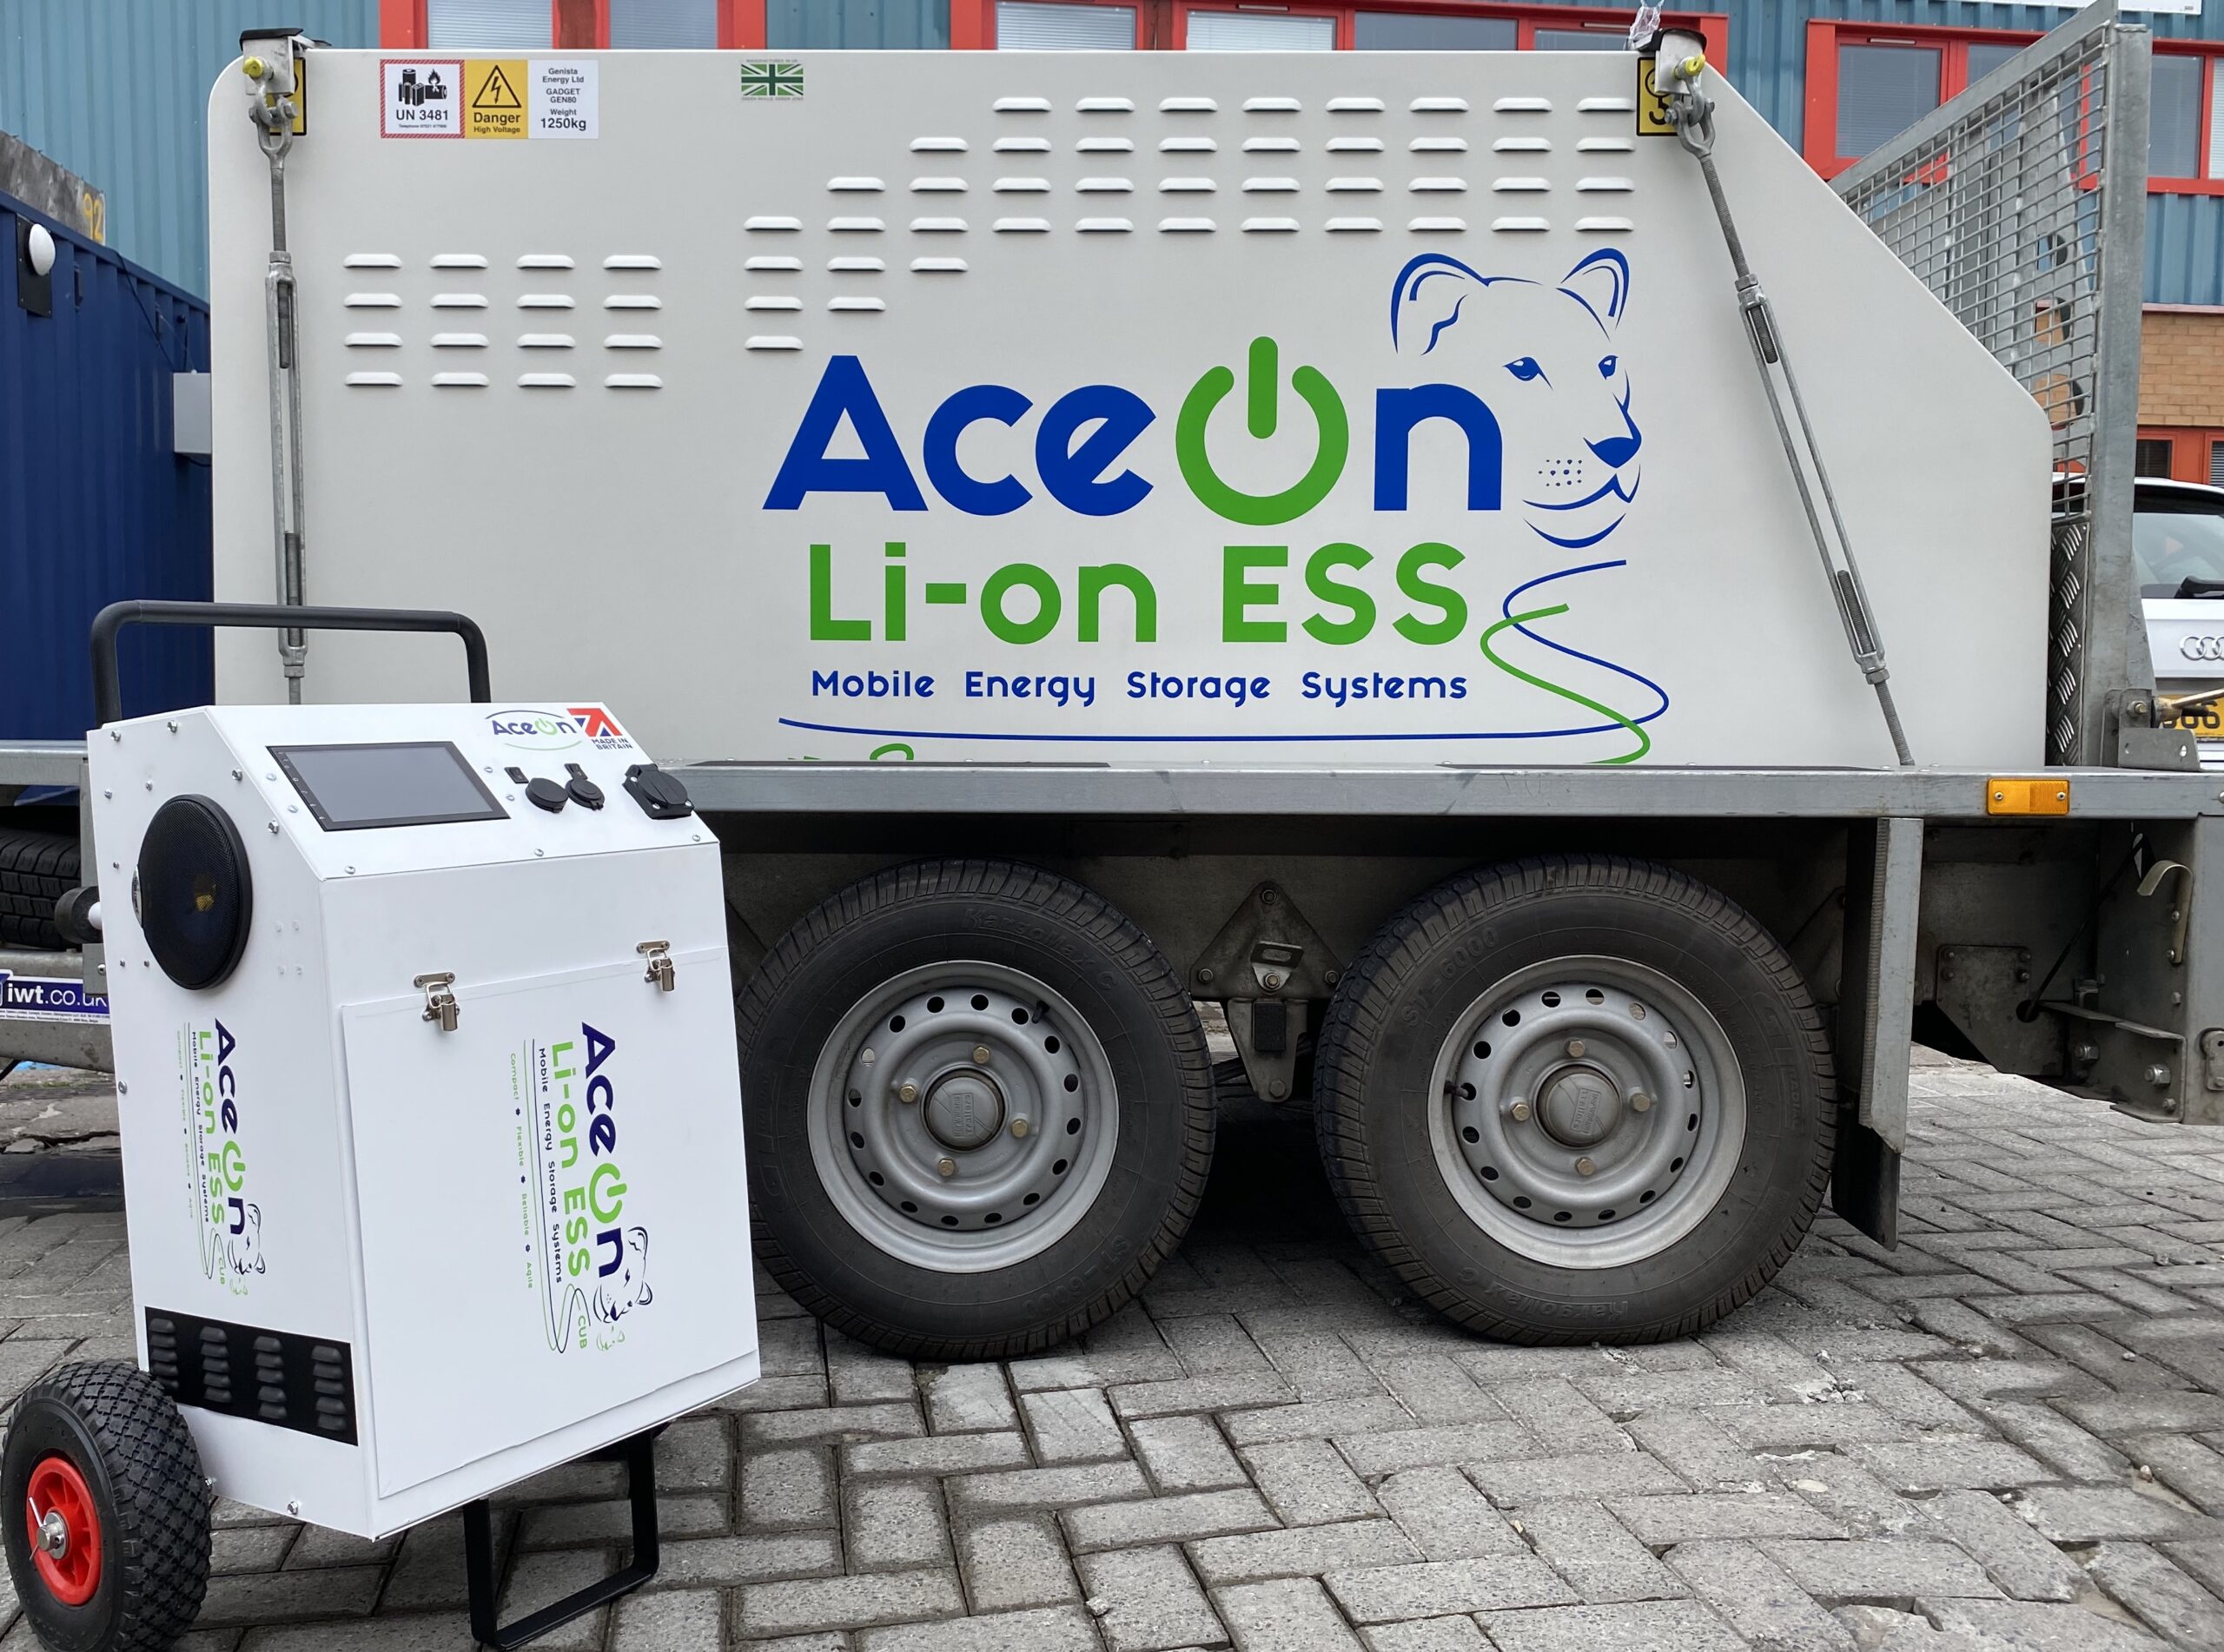 The new Lion ESS 80kWh mobile energy storage system and smaller Lion ESS Cub portable storage system